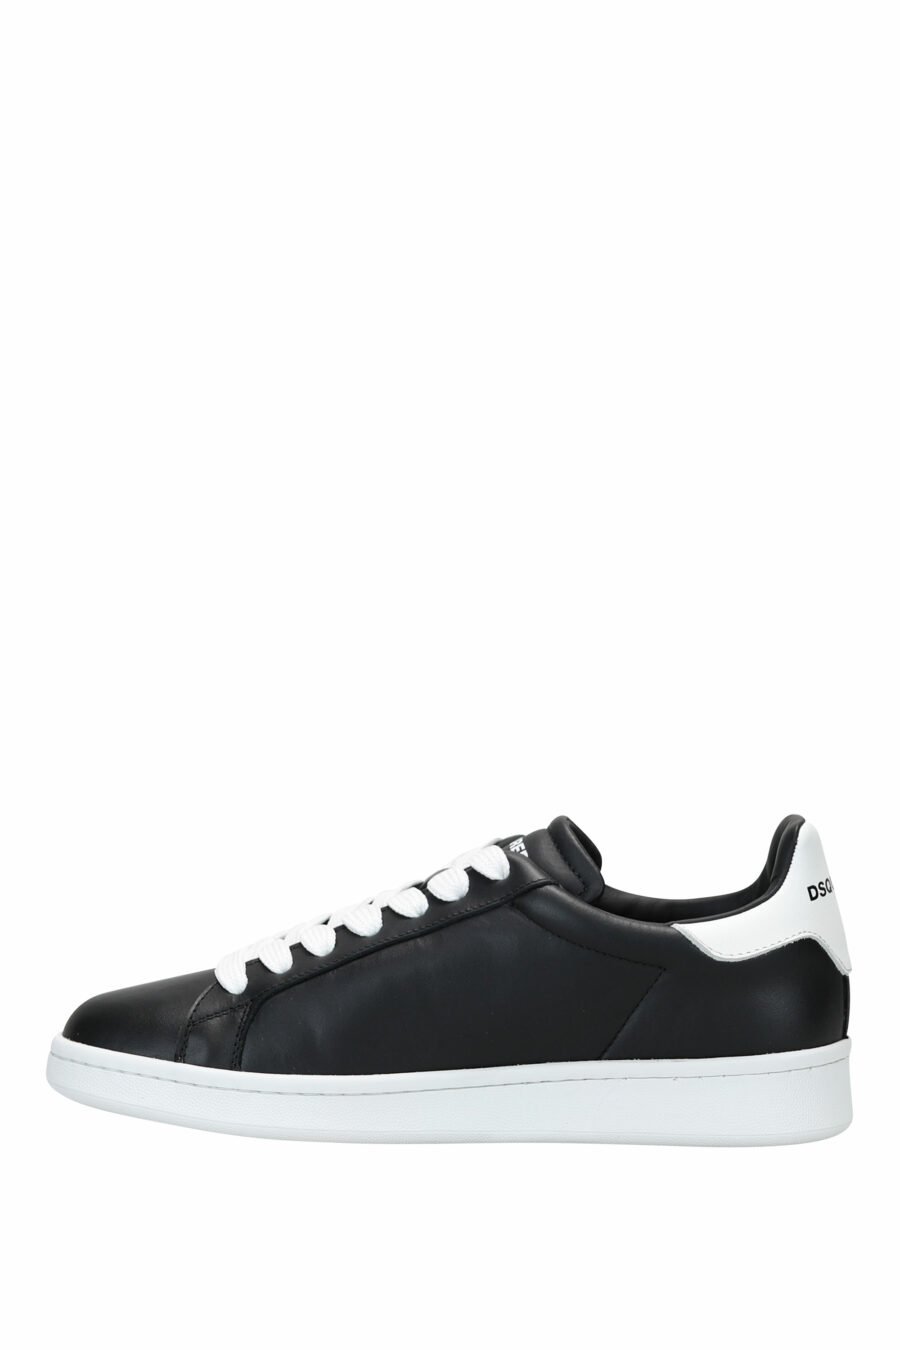 Black trainers with red leaf and white sole - 8055777240977 2